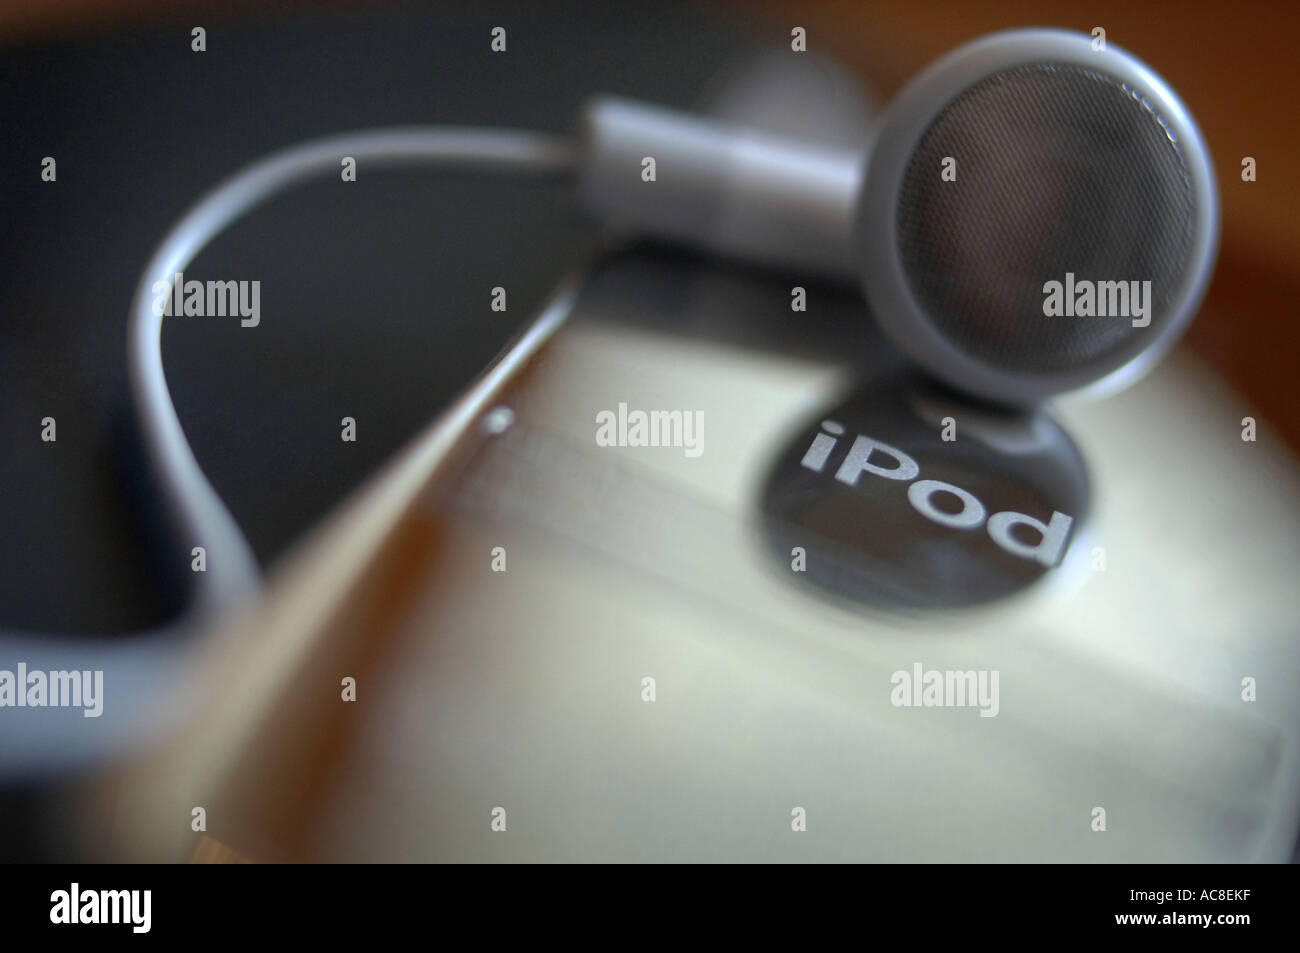 The back of an apple iPod nano showing the apple logo. Stock Photo